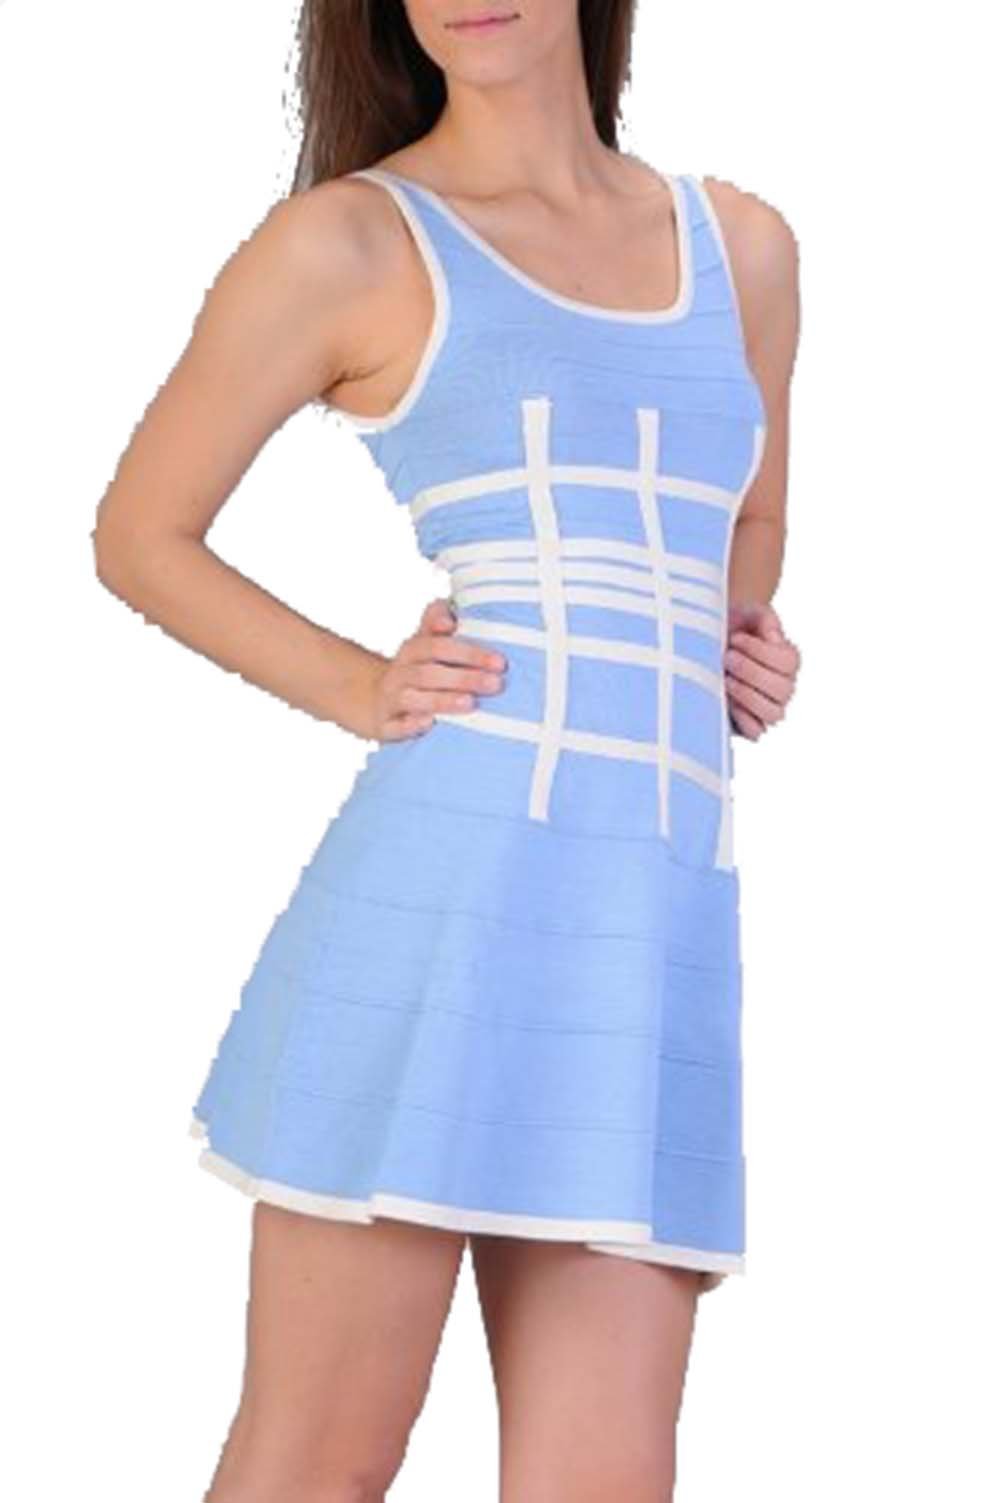 Women's Sexy Unique Flirty Contrast Stretchy Bandage Dress By Wow Couture (Large, Baby Blue)